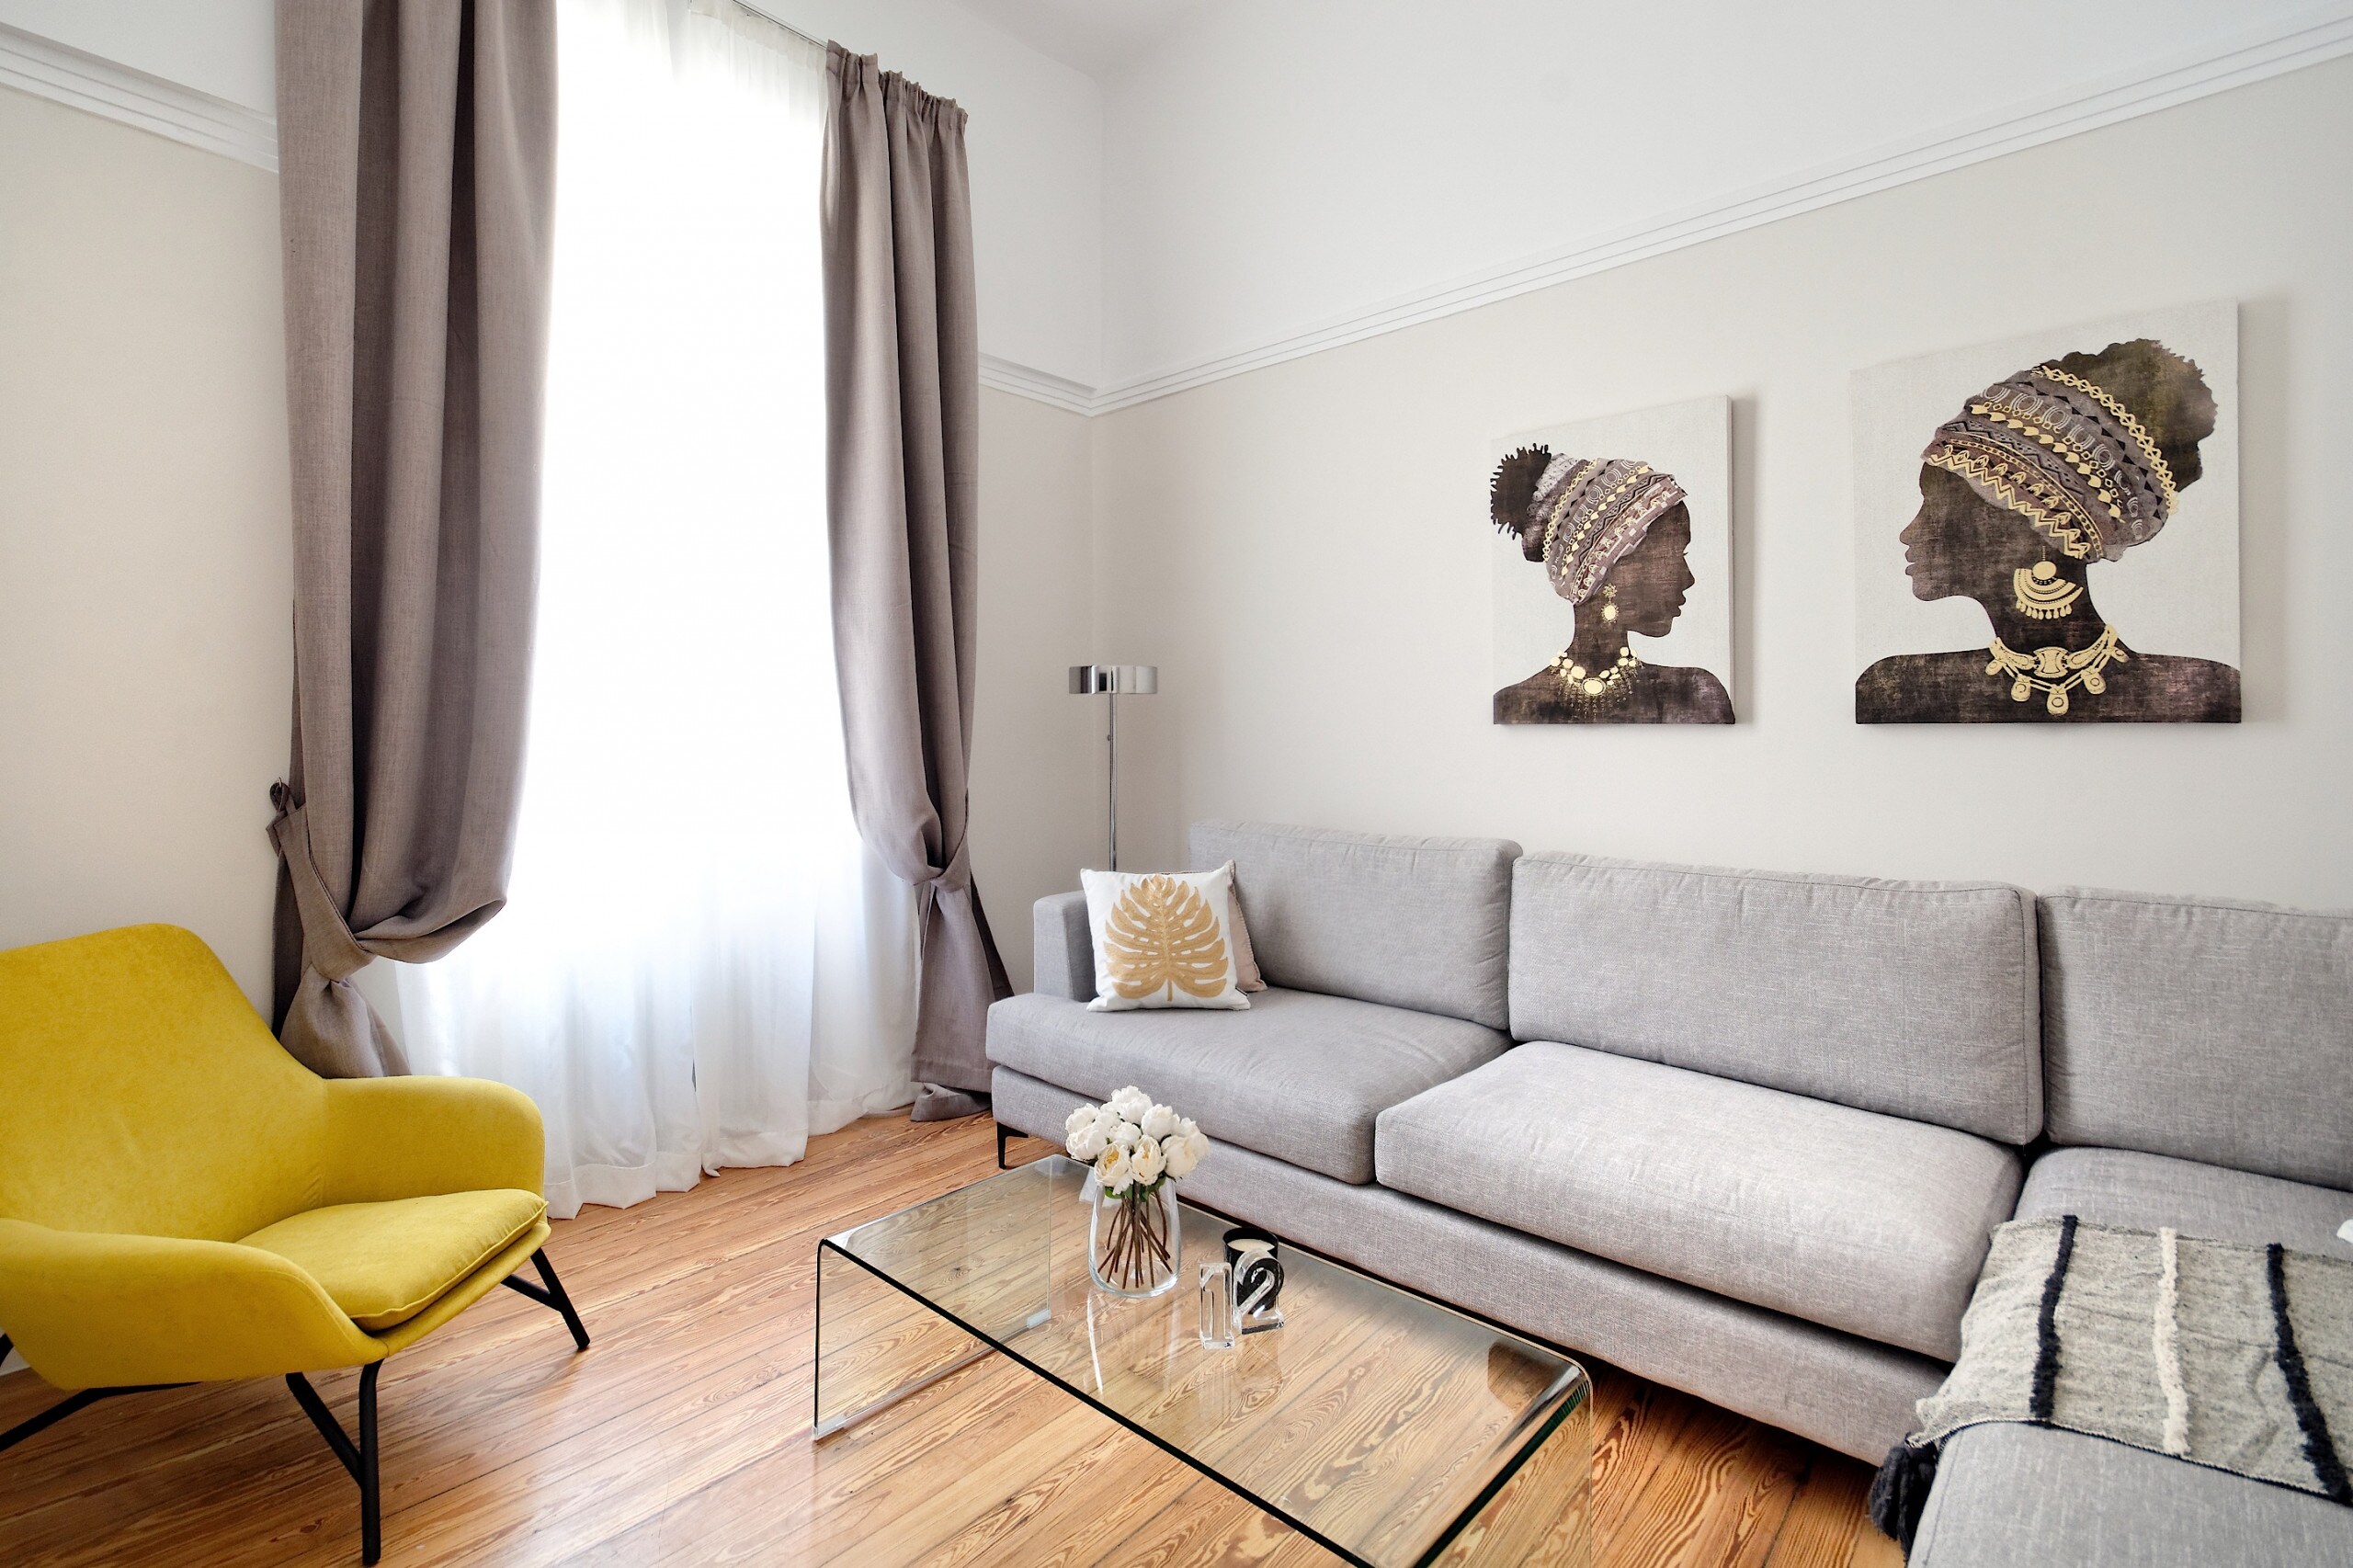 The living area has a corner sofa bed which can open and accommodate two extra persons. The big flat smart TV is connected to the internet of the apartment and you can enjoy Netflix or other on line channels.